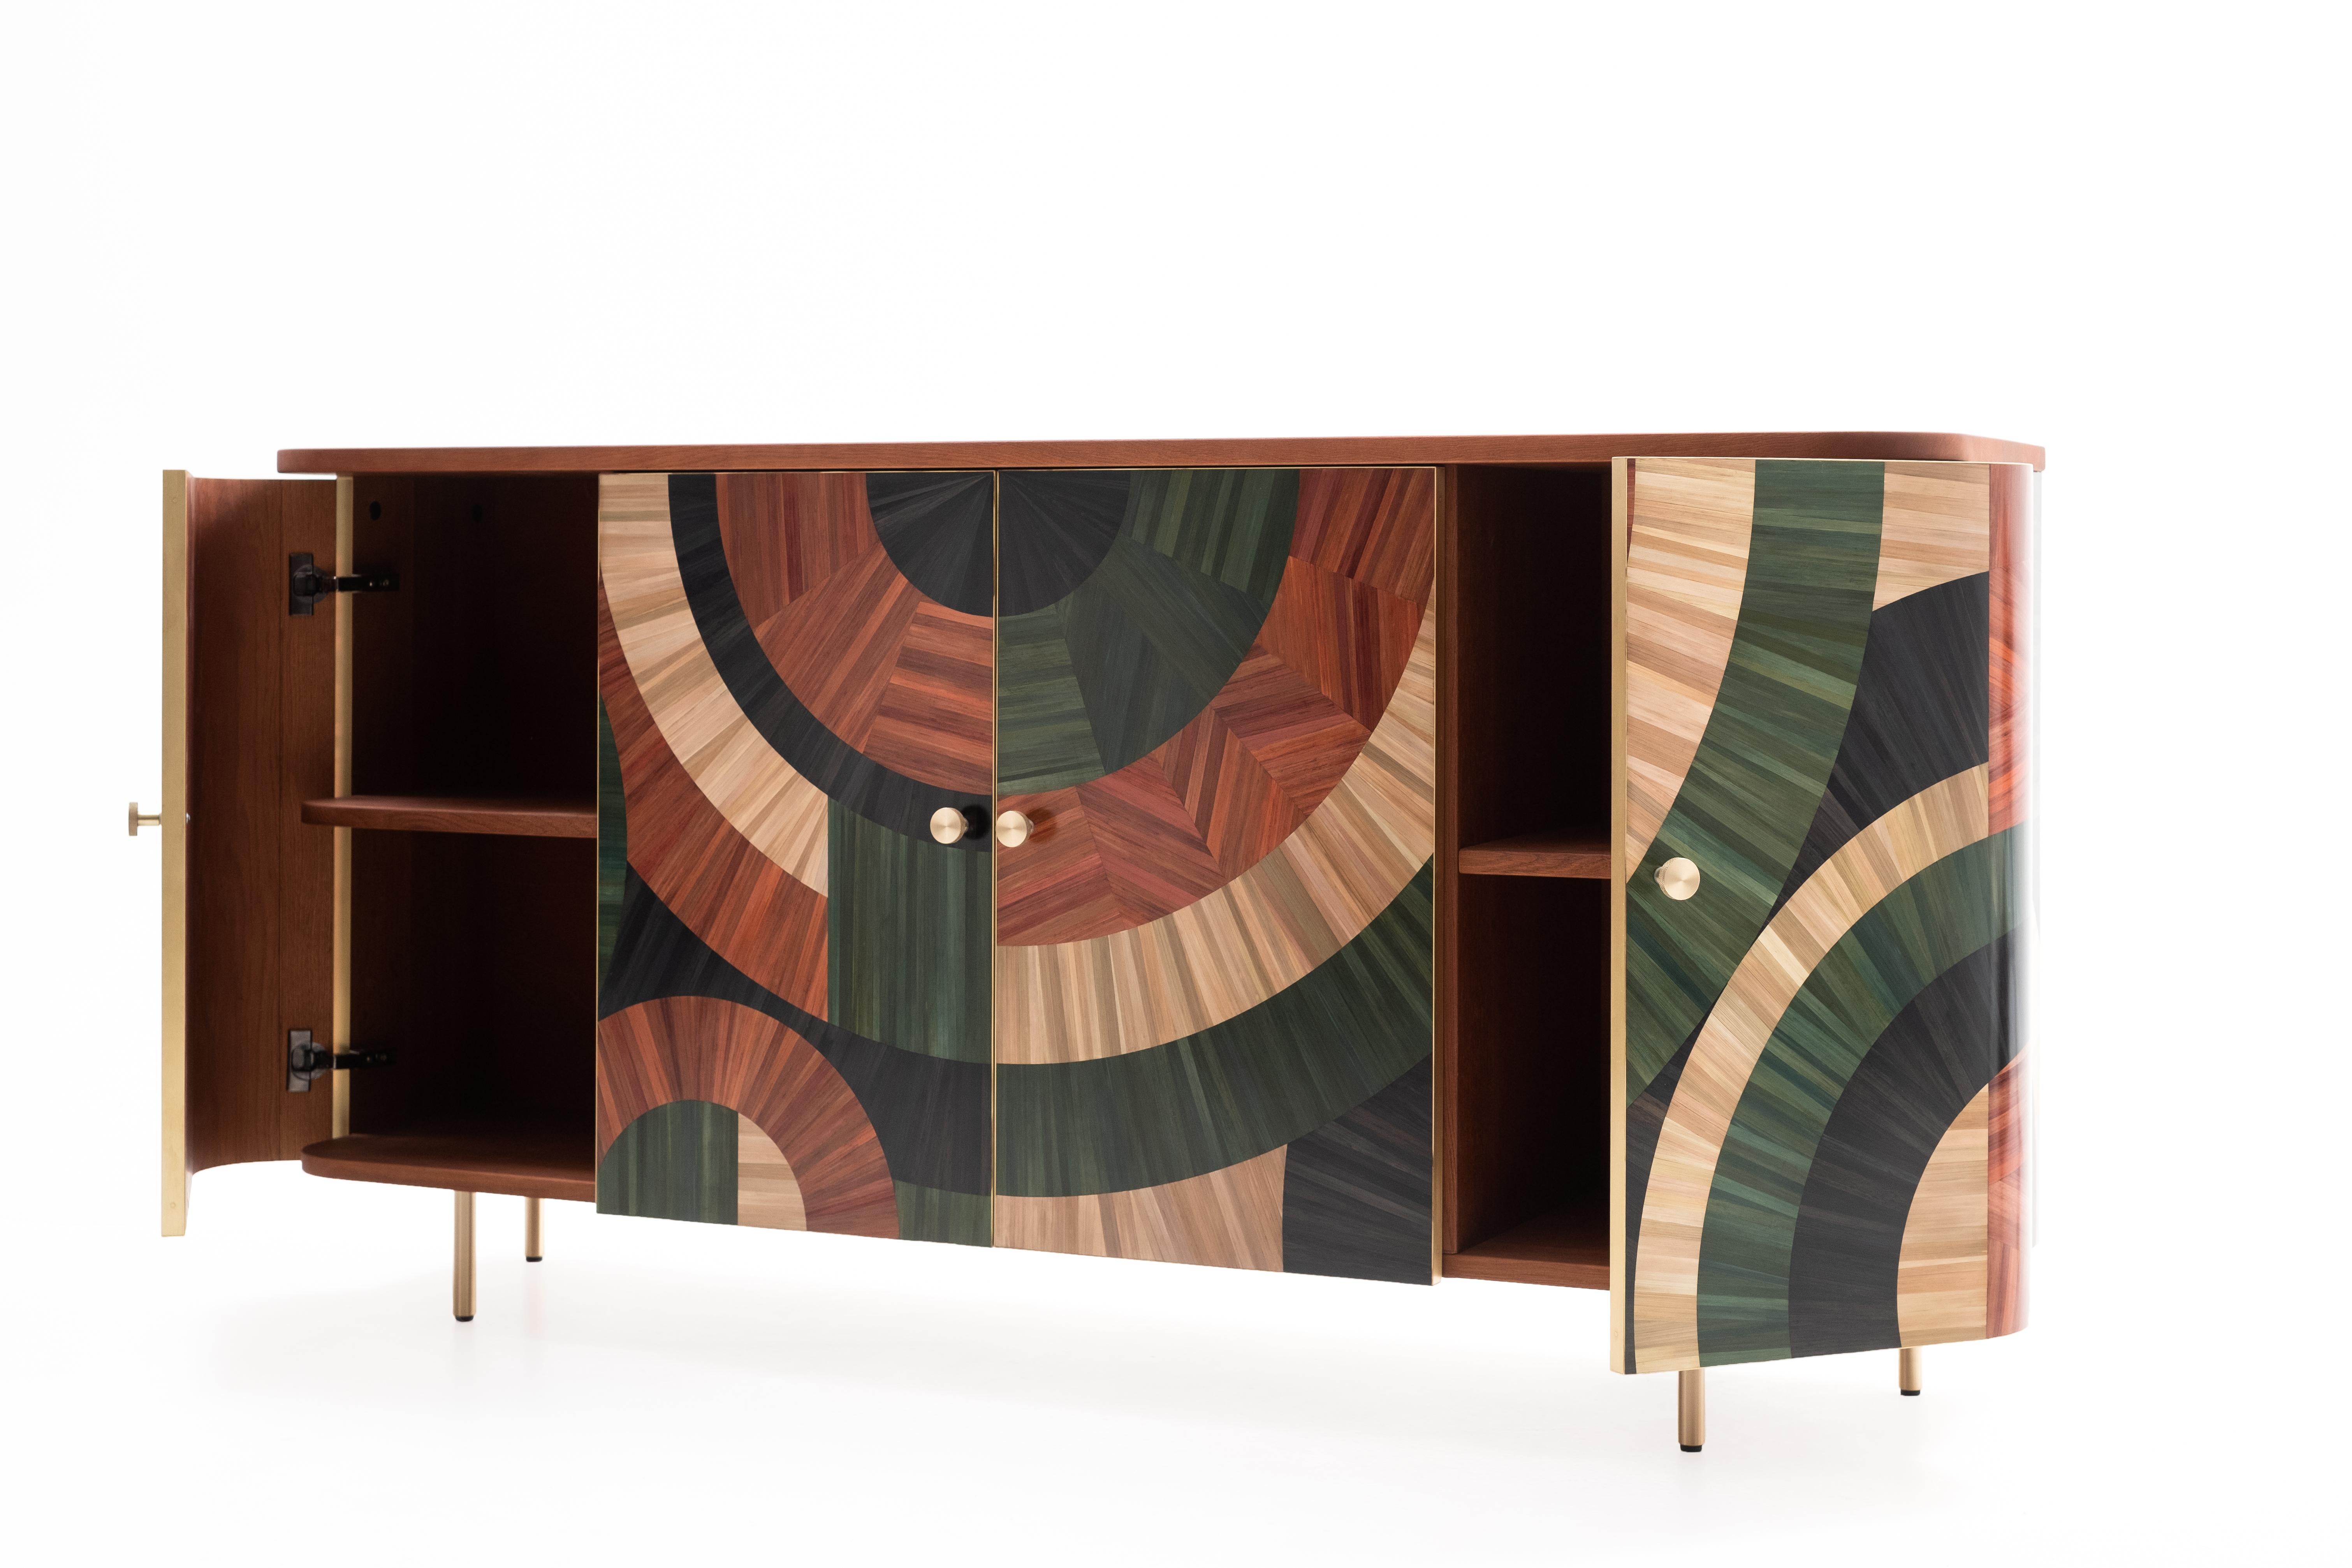 Solomia straw Marquetry Art Deco oakwood cabinet green orange black natural colors by RUDA Studio

The cabinet Solomia is inspired by the fertility of our land. The ornament is made in the ancient straw Marquetry technique in orange, green, black